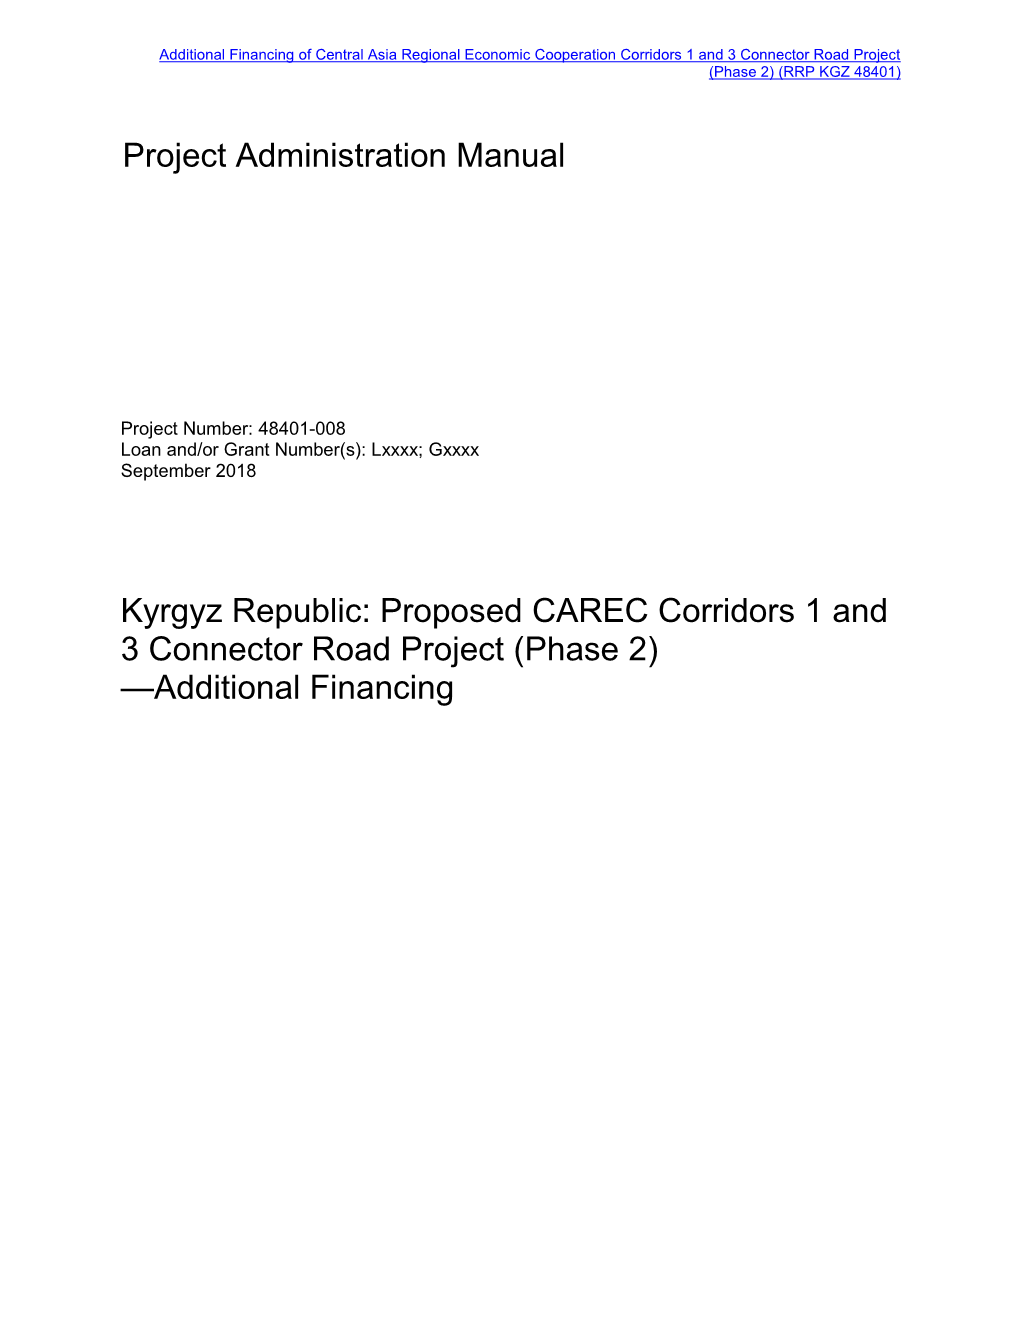 Proposed CAREC Corridors 1 and 3 Connector Road Project (Phase 2) —Additional Financing